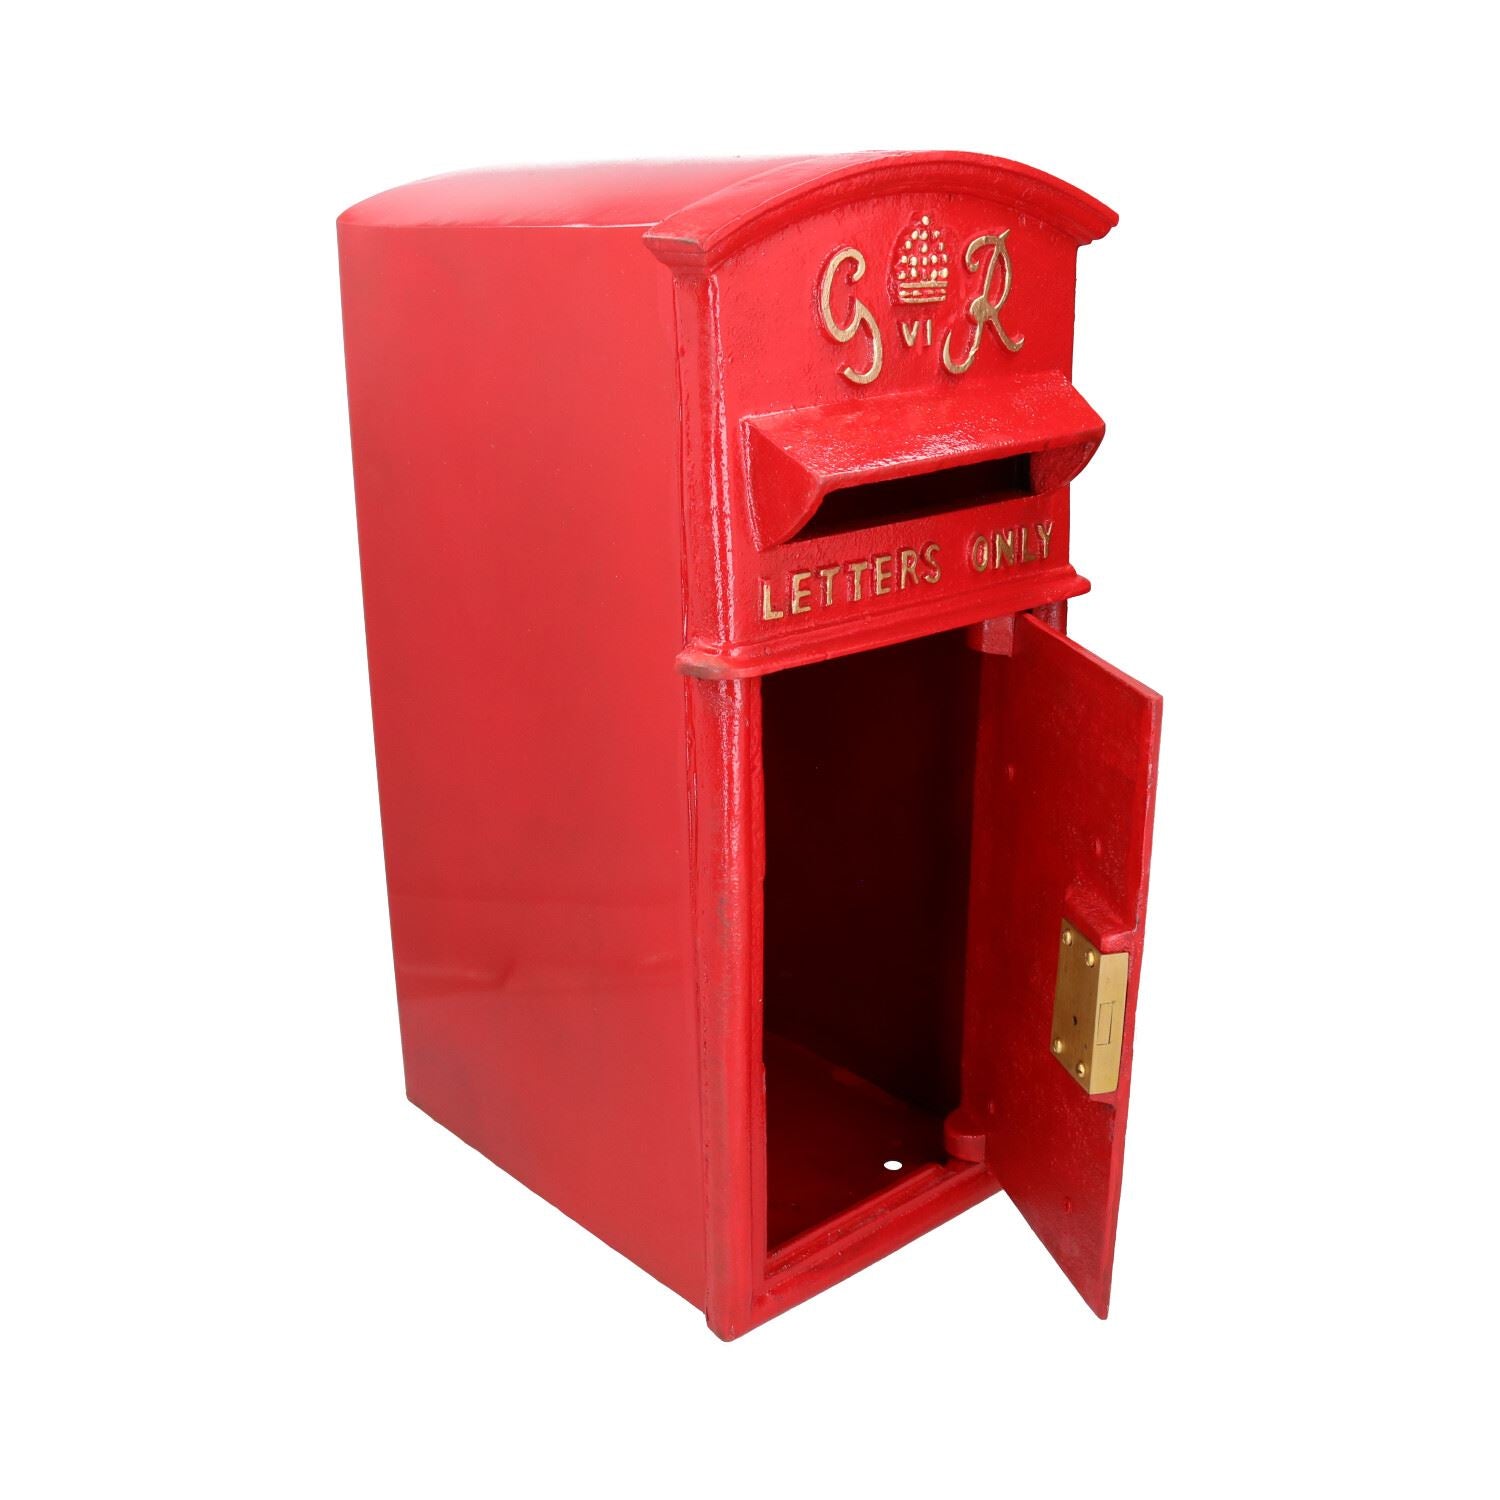 GR Royal Mail Post Mail Letter Box Replica Cast Iron Red Post Office Lockable GB